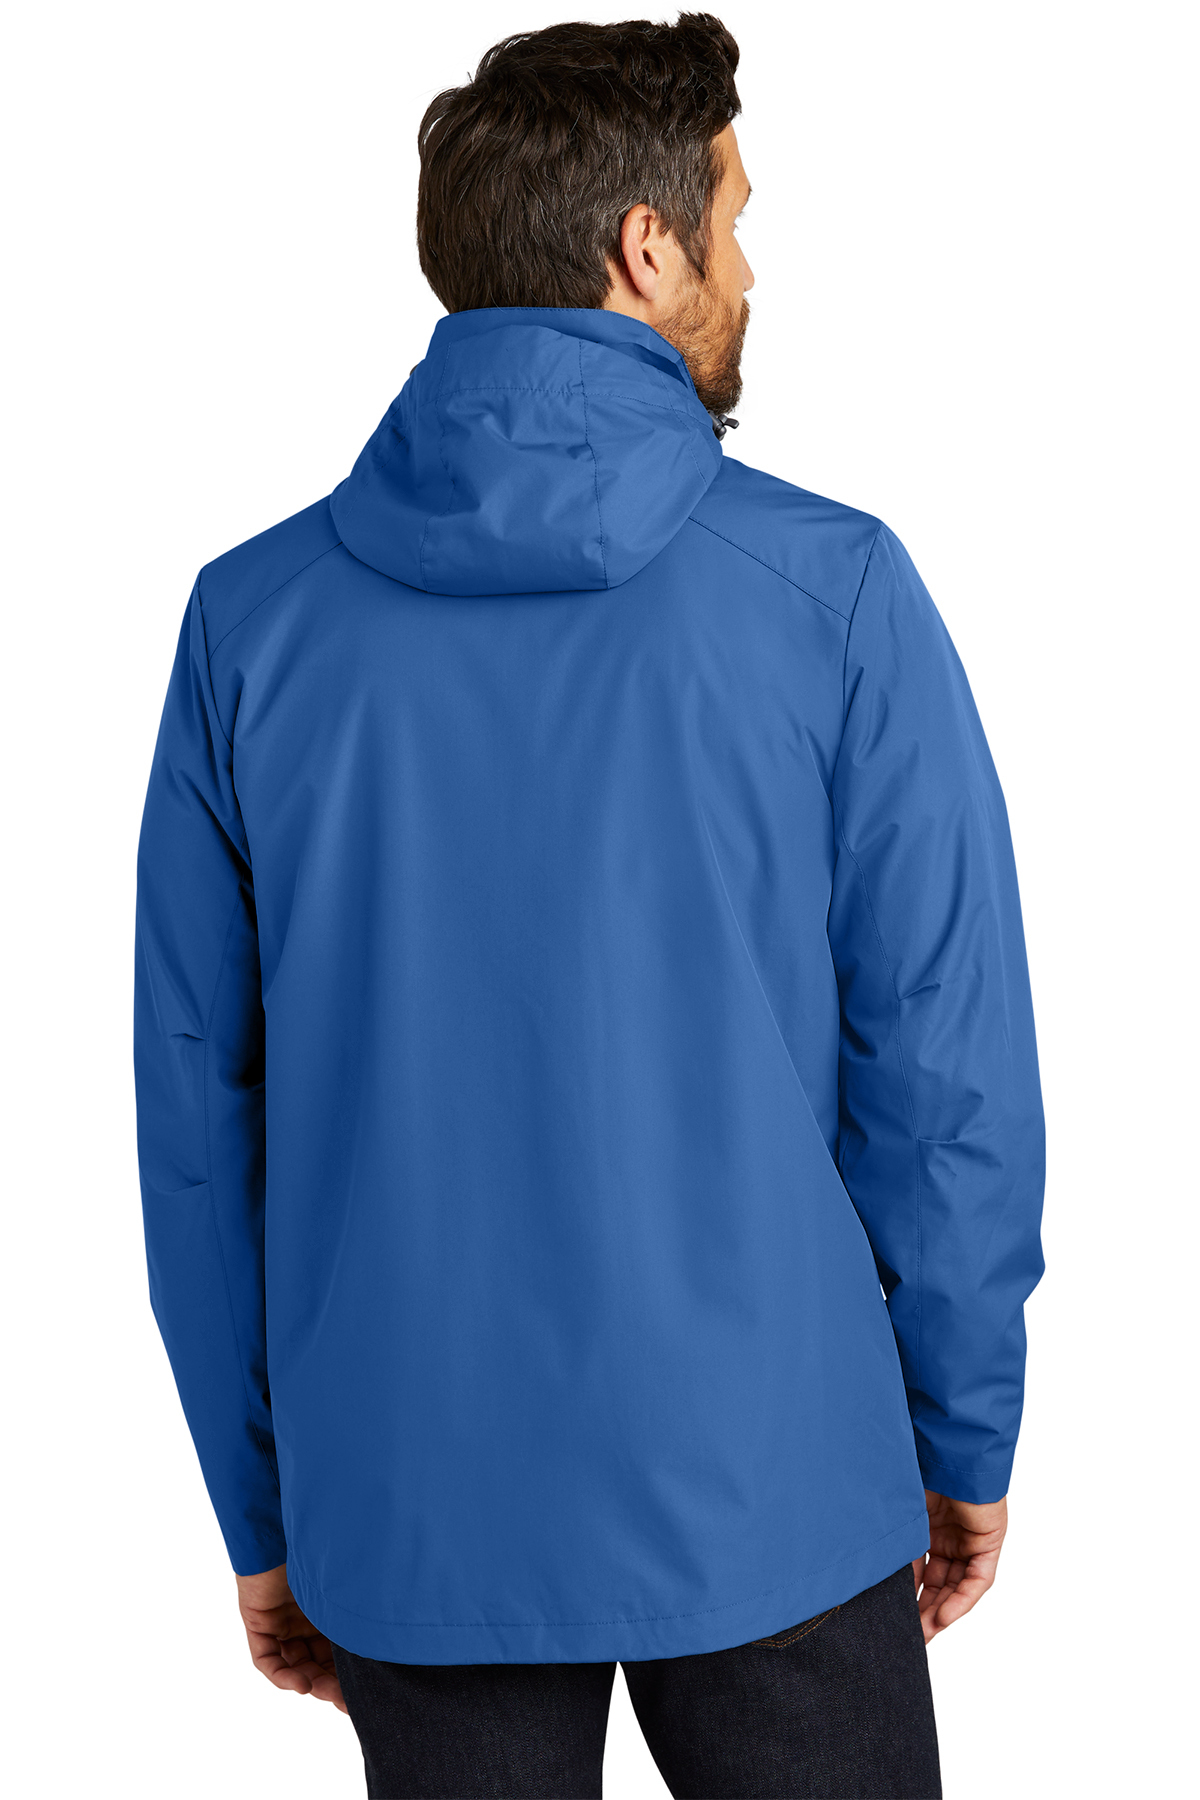 Port Authority All-Weather 3-in-1 Jacket | Product | SanMar